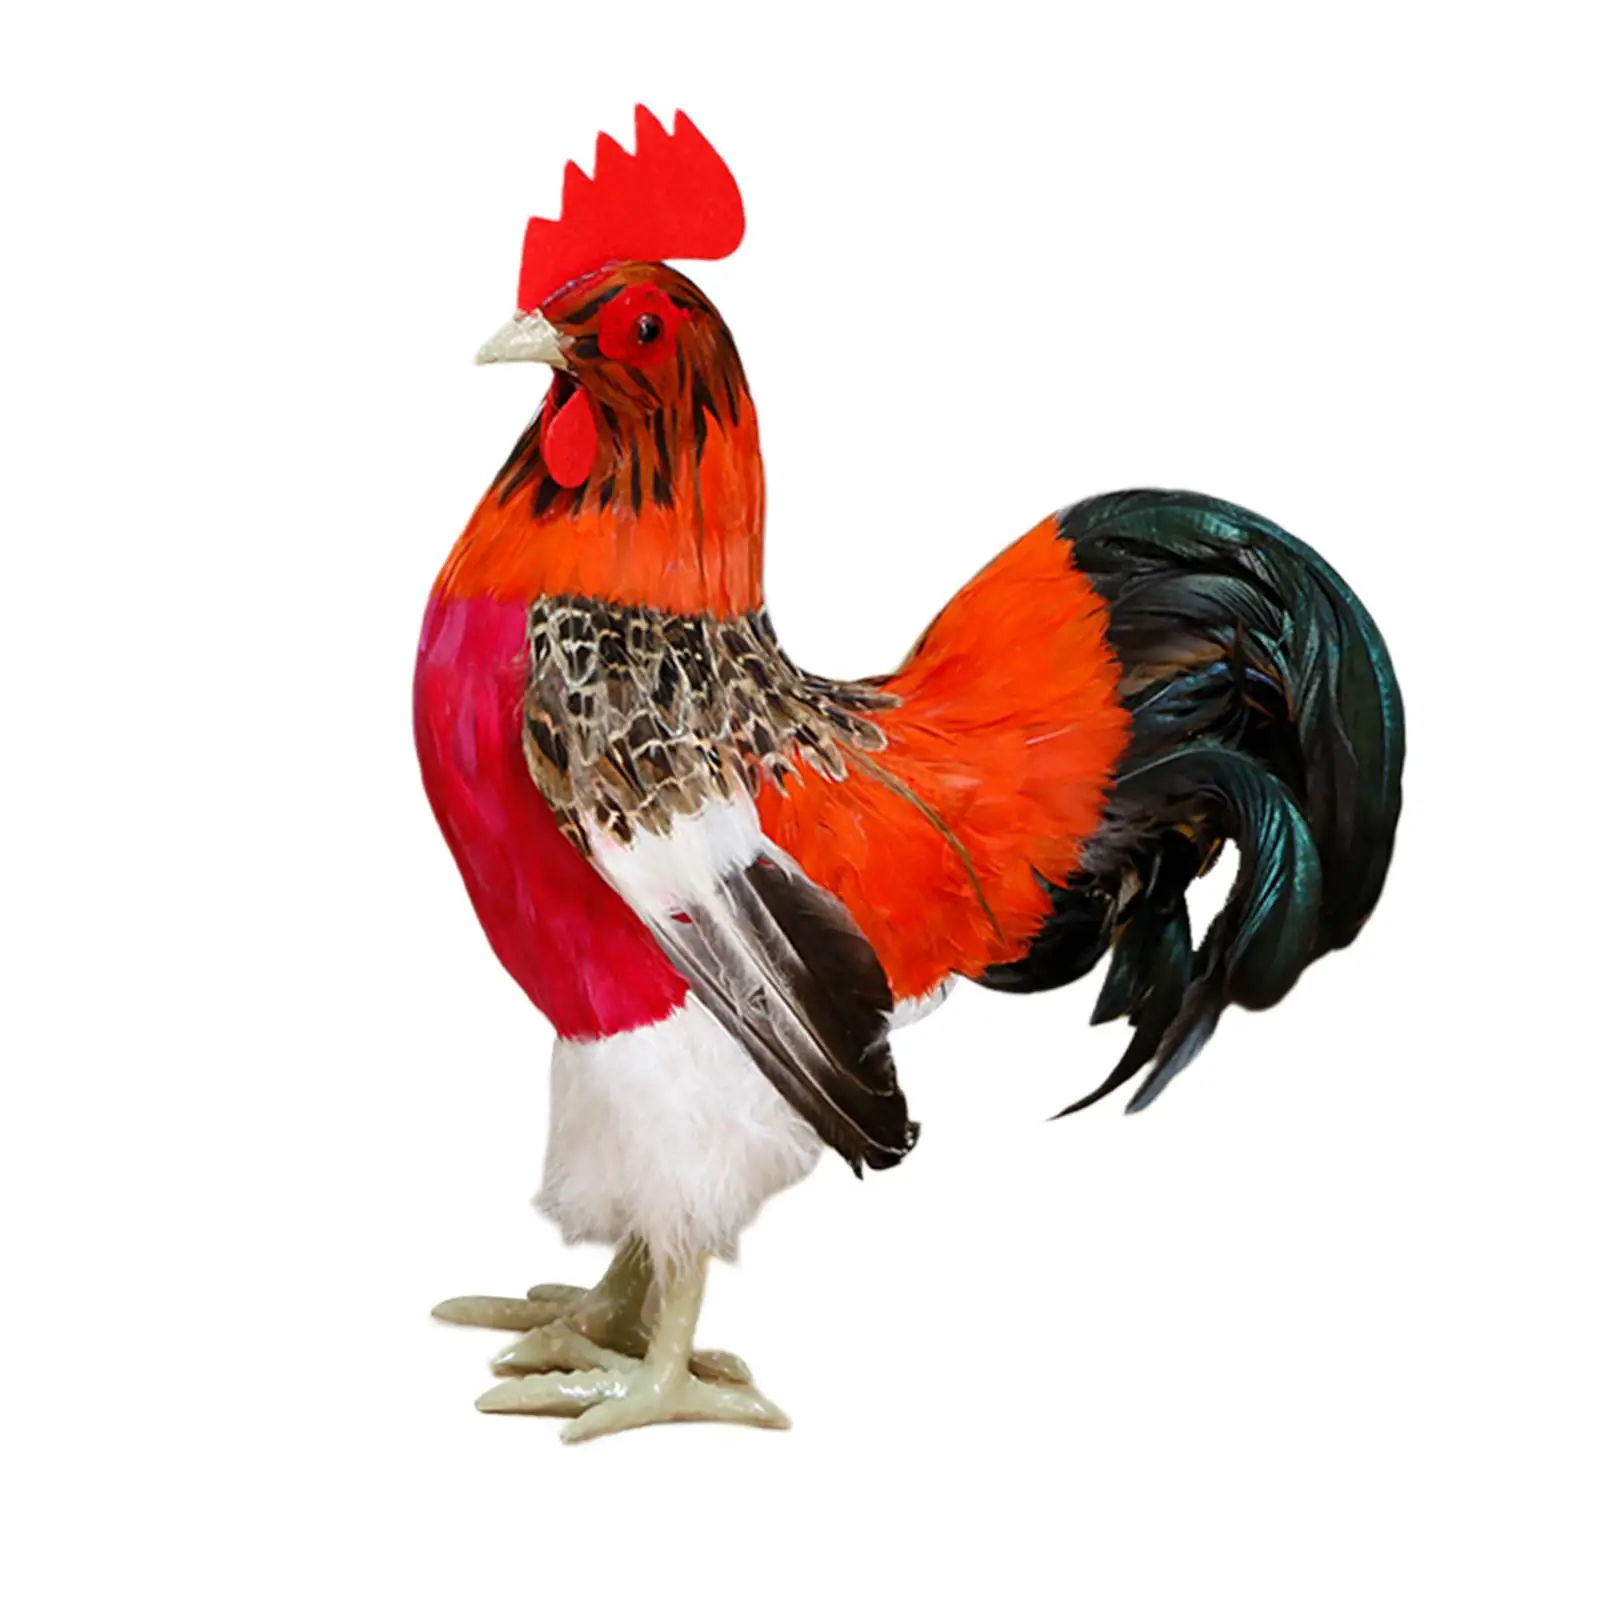 Simulation Rooster Statue Crafts Chicken Ornament Art Decoration for Outdoor Room Lawn Decoration